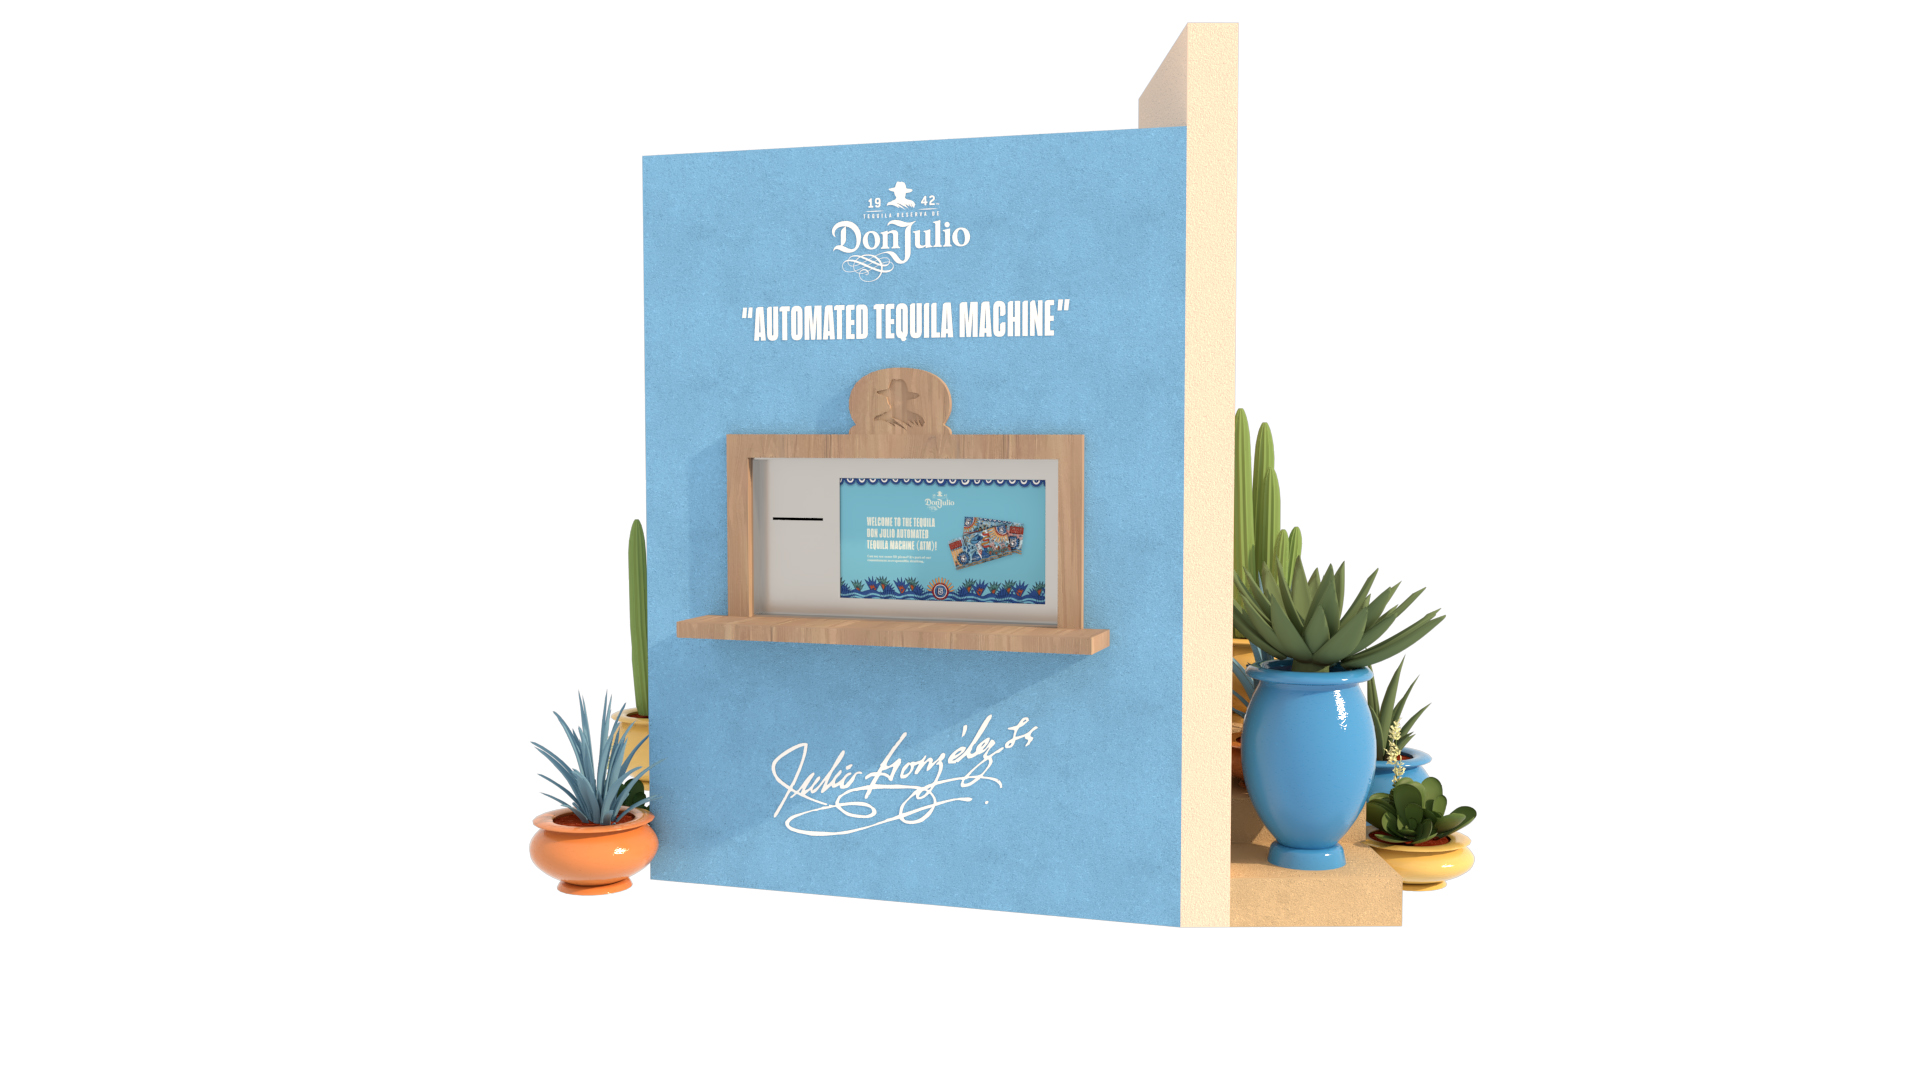 From May 1 - May 5, consumers can win up to 10 Don Julio Cincos (worth $50) at the Tequila Don Julio ATM. Each Don Julio Cinco features a special QR code and PIN to redeem $5 to a consumers’ Venmo account that they can then use at a local bar or restaurant of their choice.